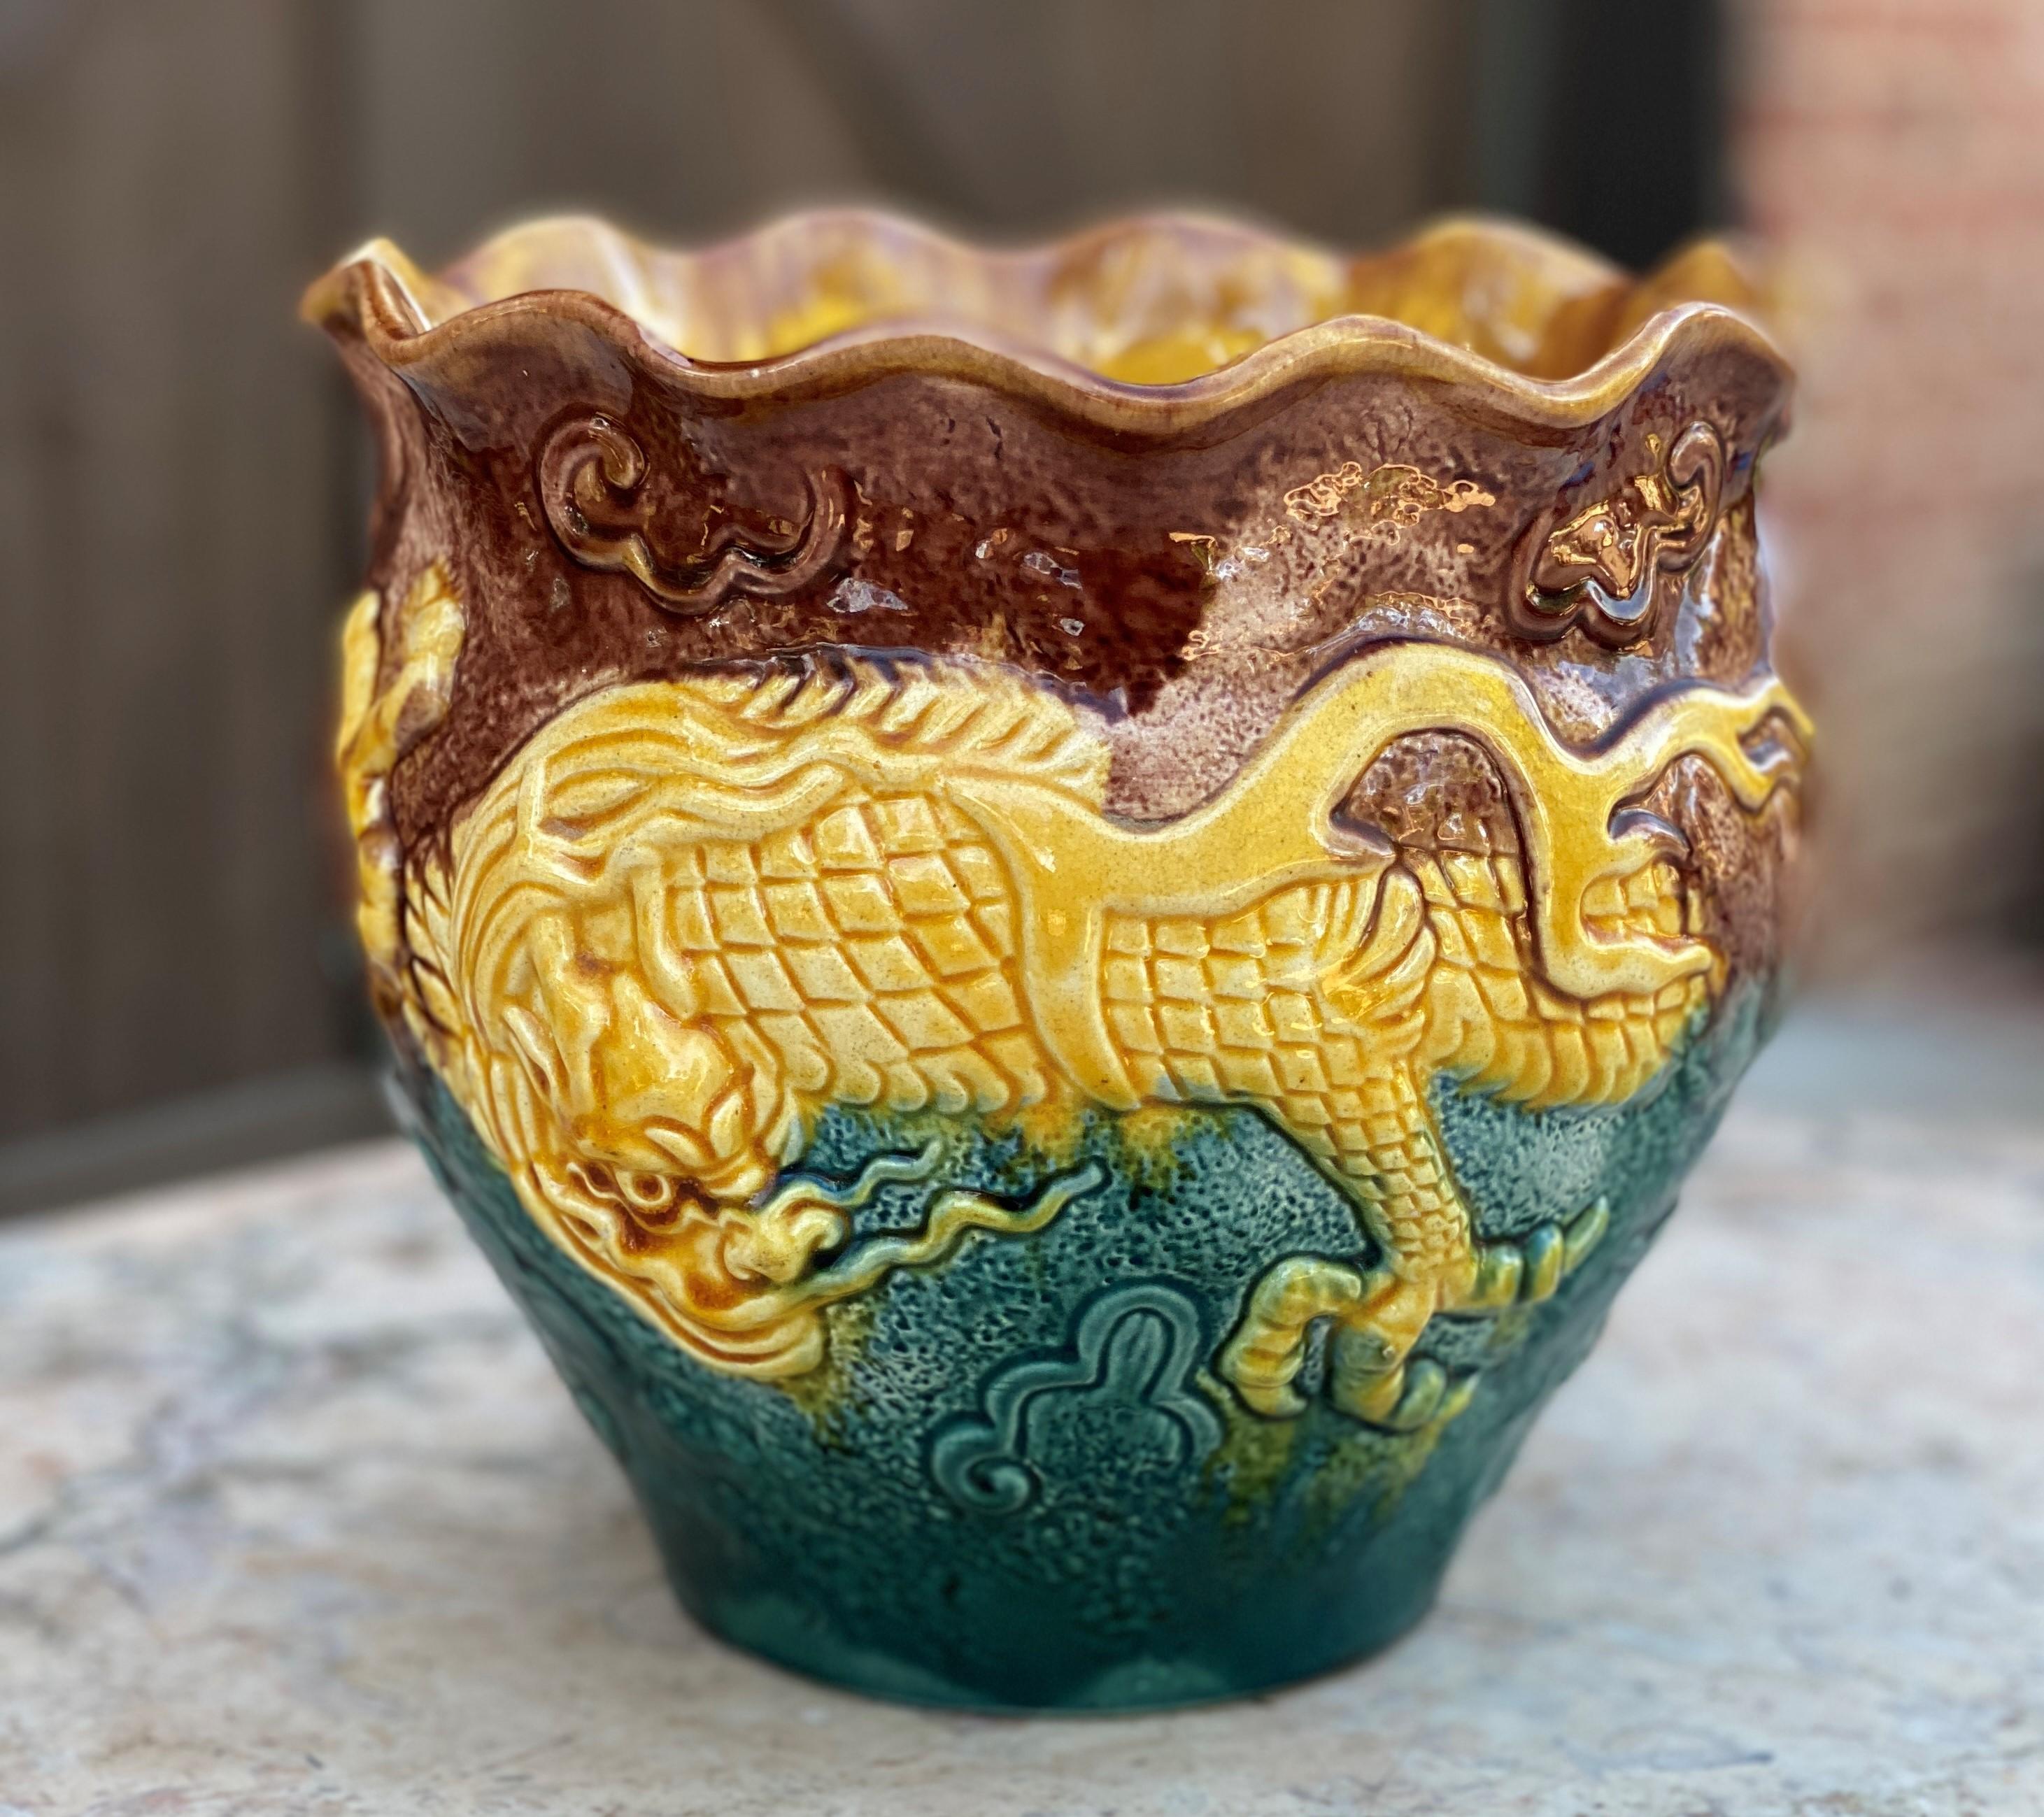 Gorgeous Antique French Majolica Cache Pot, Planter, Jardiniere, Flower Pot or Vase~~Art Nouveau~~c. 1900

Authentic French Majolica planter or cache pot~~vibrant colors of brown, gold, and green with dragon accents and a pumpkin color glazed